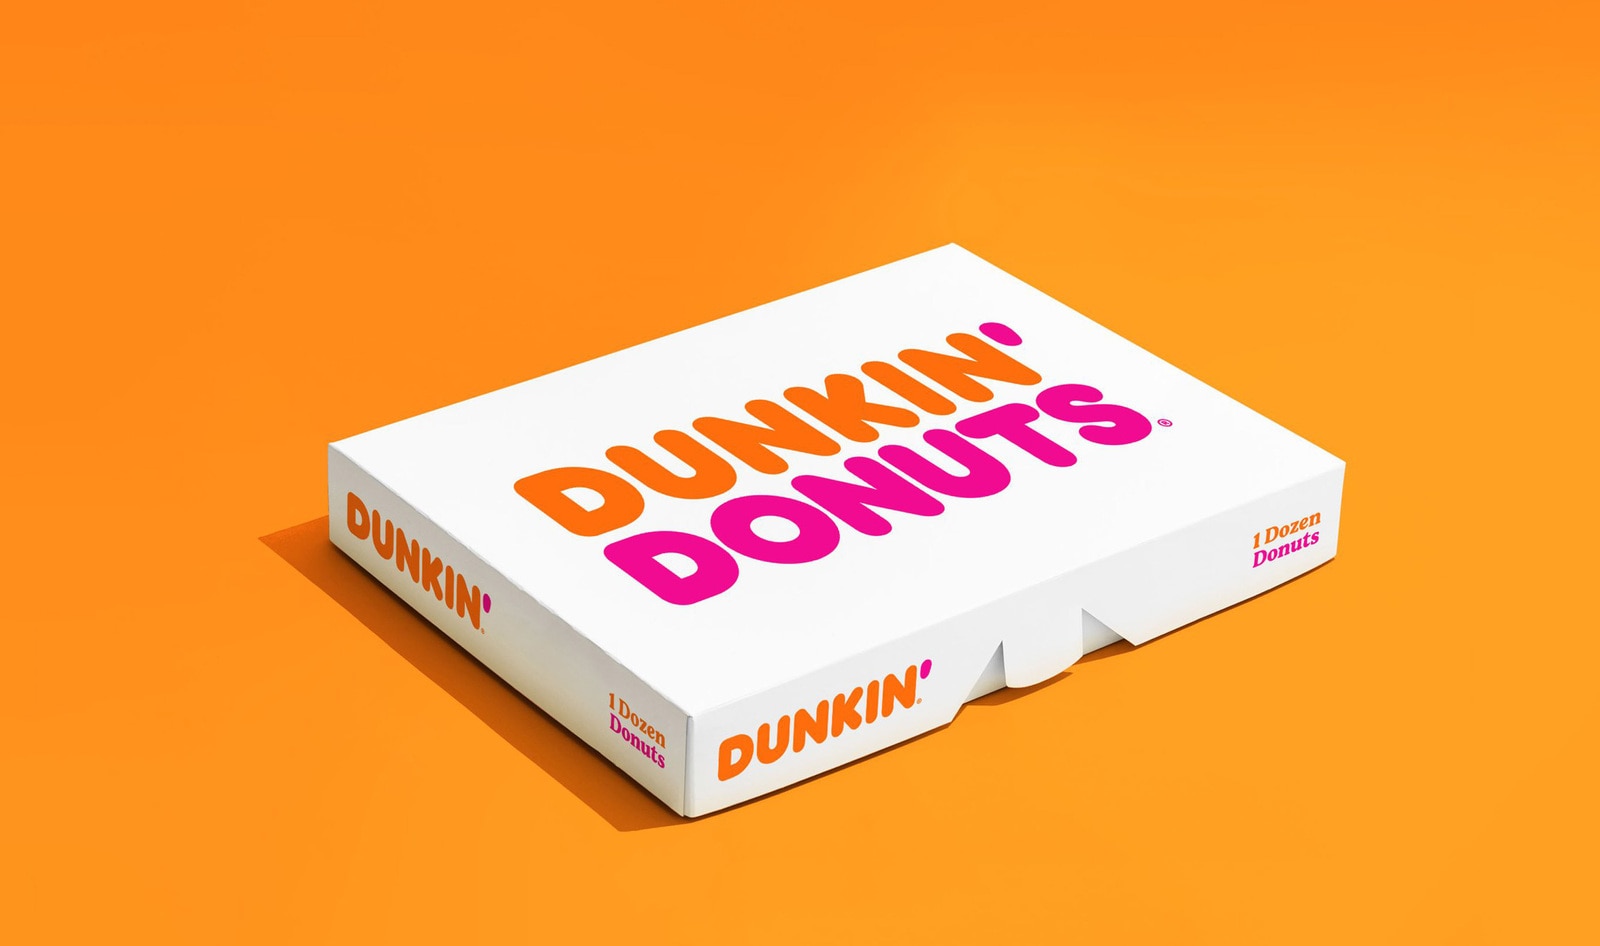 Dunkin’ CEO On Adding a Vegan Doughnut: “We Are Looking at It Closely”